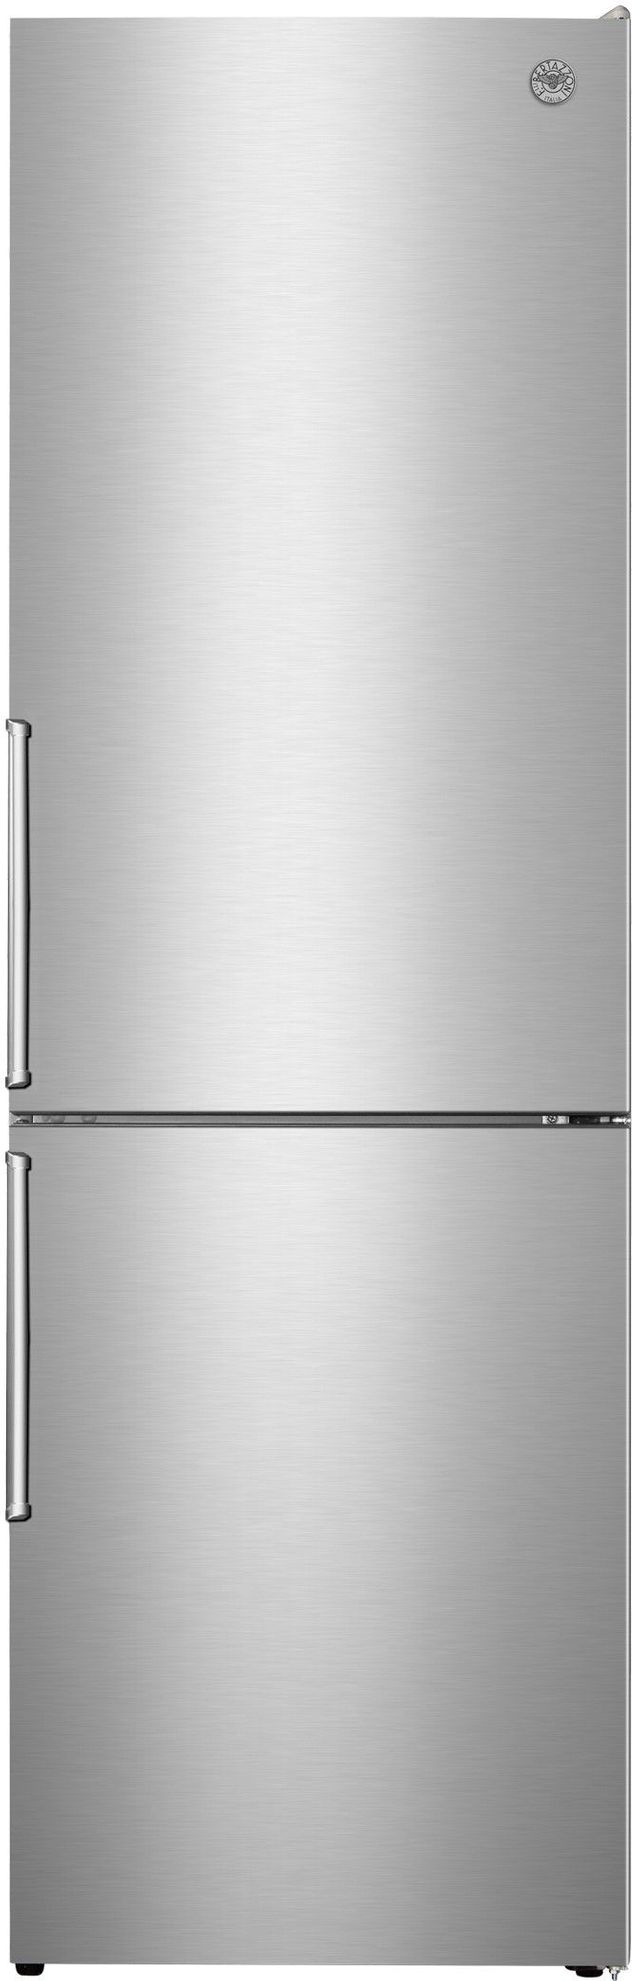 Bertazzoni Professional and Master Series 11.5 Cu. Ft. Stainless Steel Counter Depth Freestanding Bottom Mount Refrigerator-1